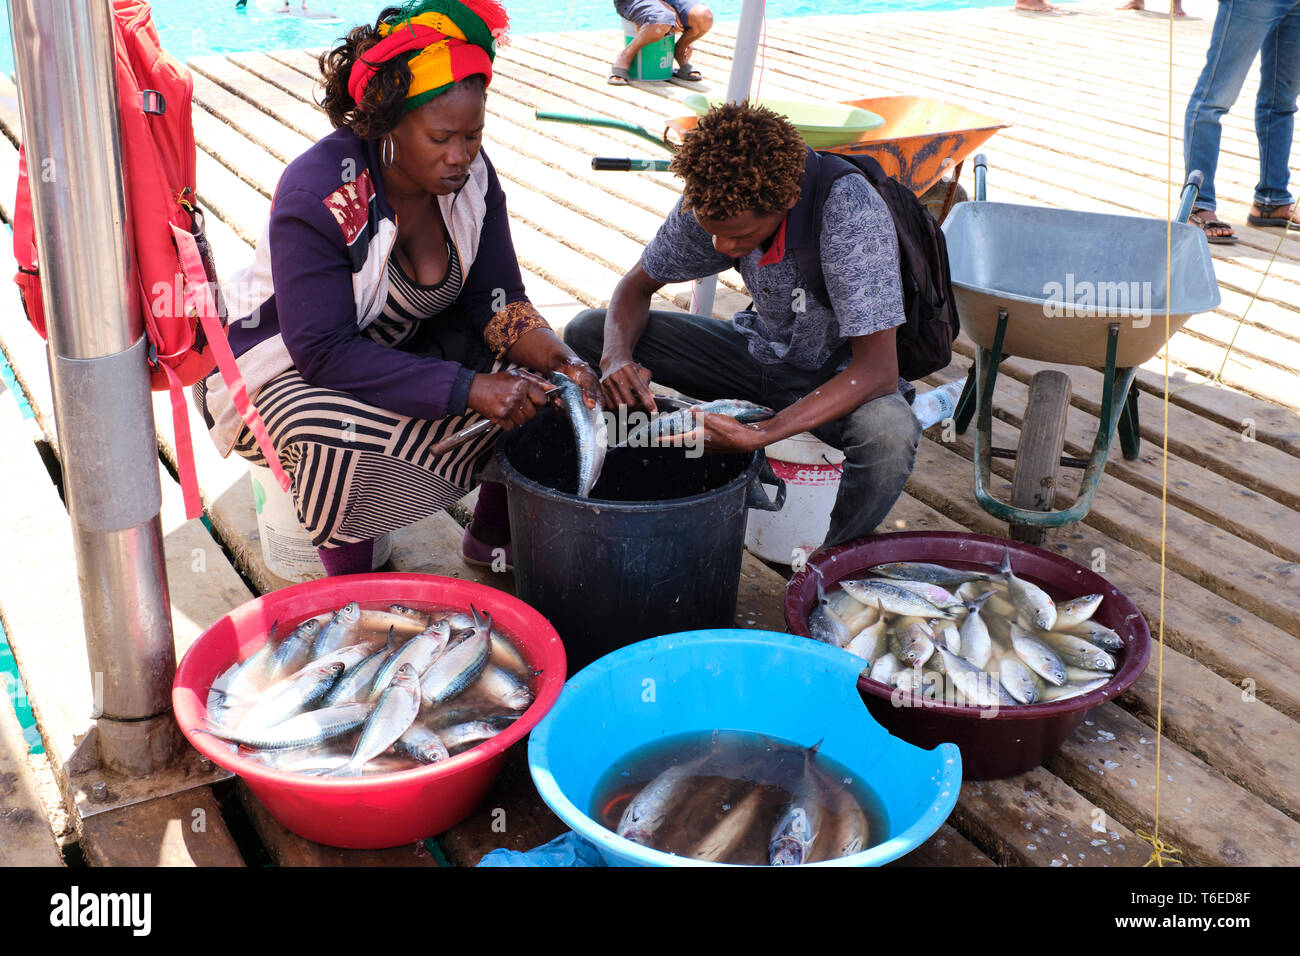 Freshly Caught Fish Being Prepared For Sale On Santa Maria Pier, Sal Island, Cape Verde, Africa Stock Photo